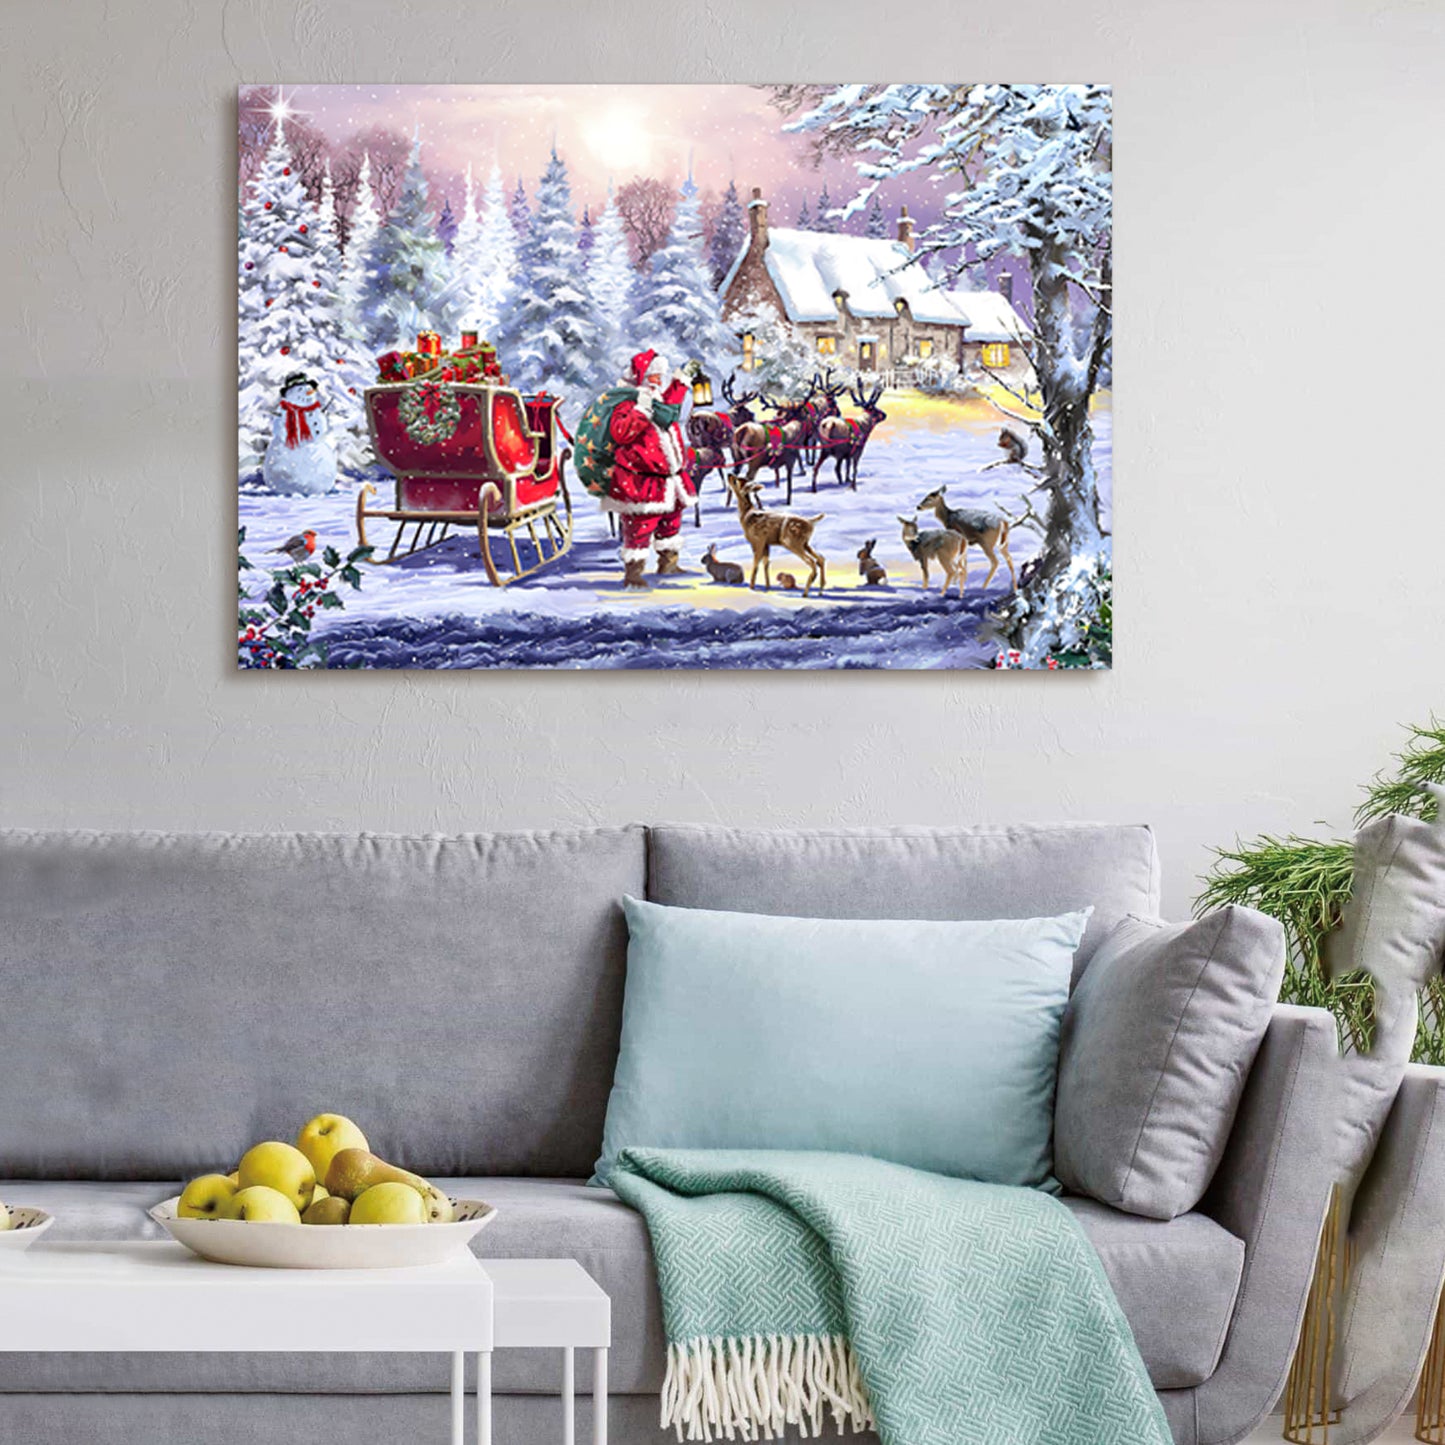 Framed Canvas Wall Art Decor Painting For Chrismas, Painting For Chrismas Gift, Decoration For Chrismas Eve Office Living Room, Bedroom Decor-Ready To Hang